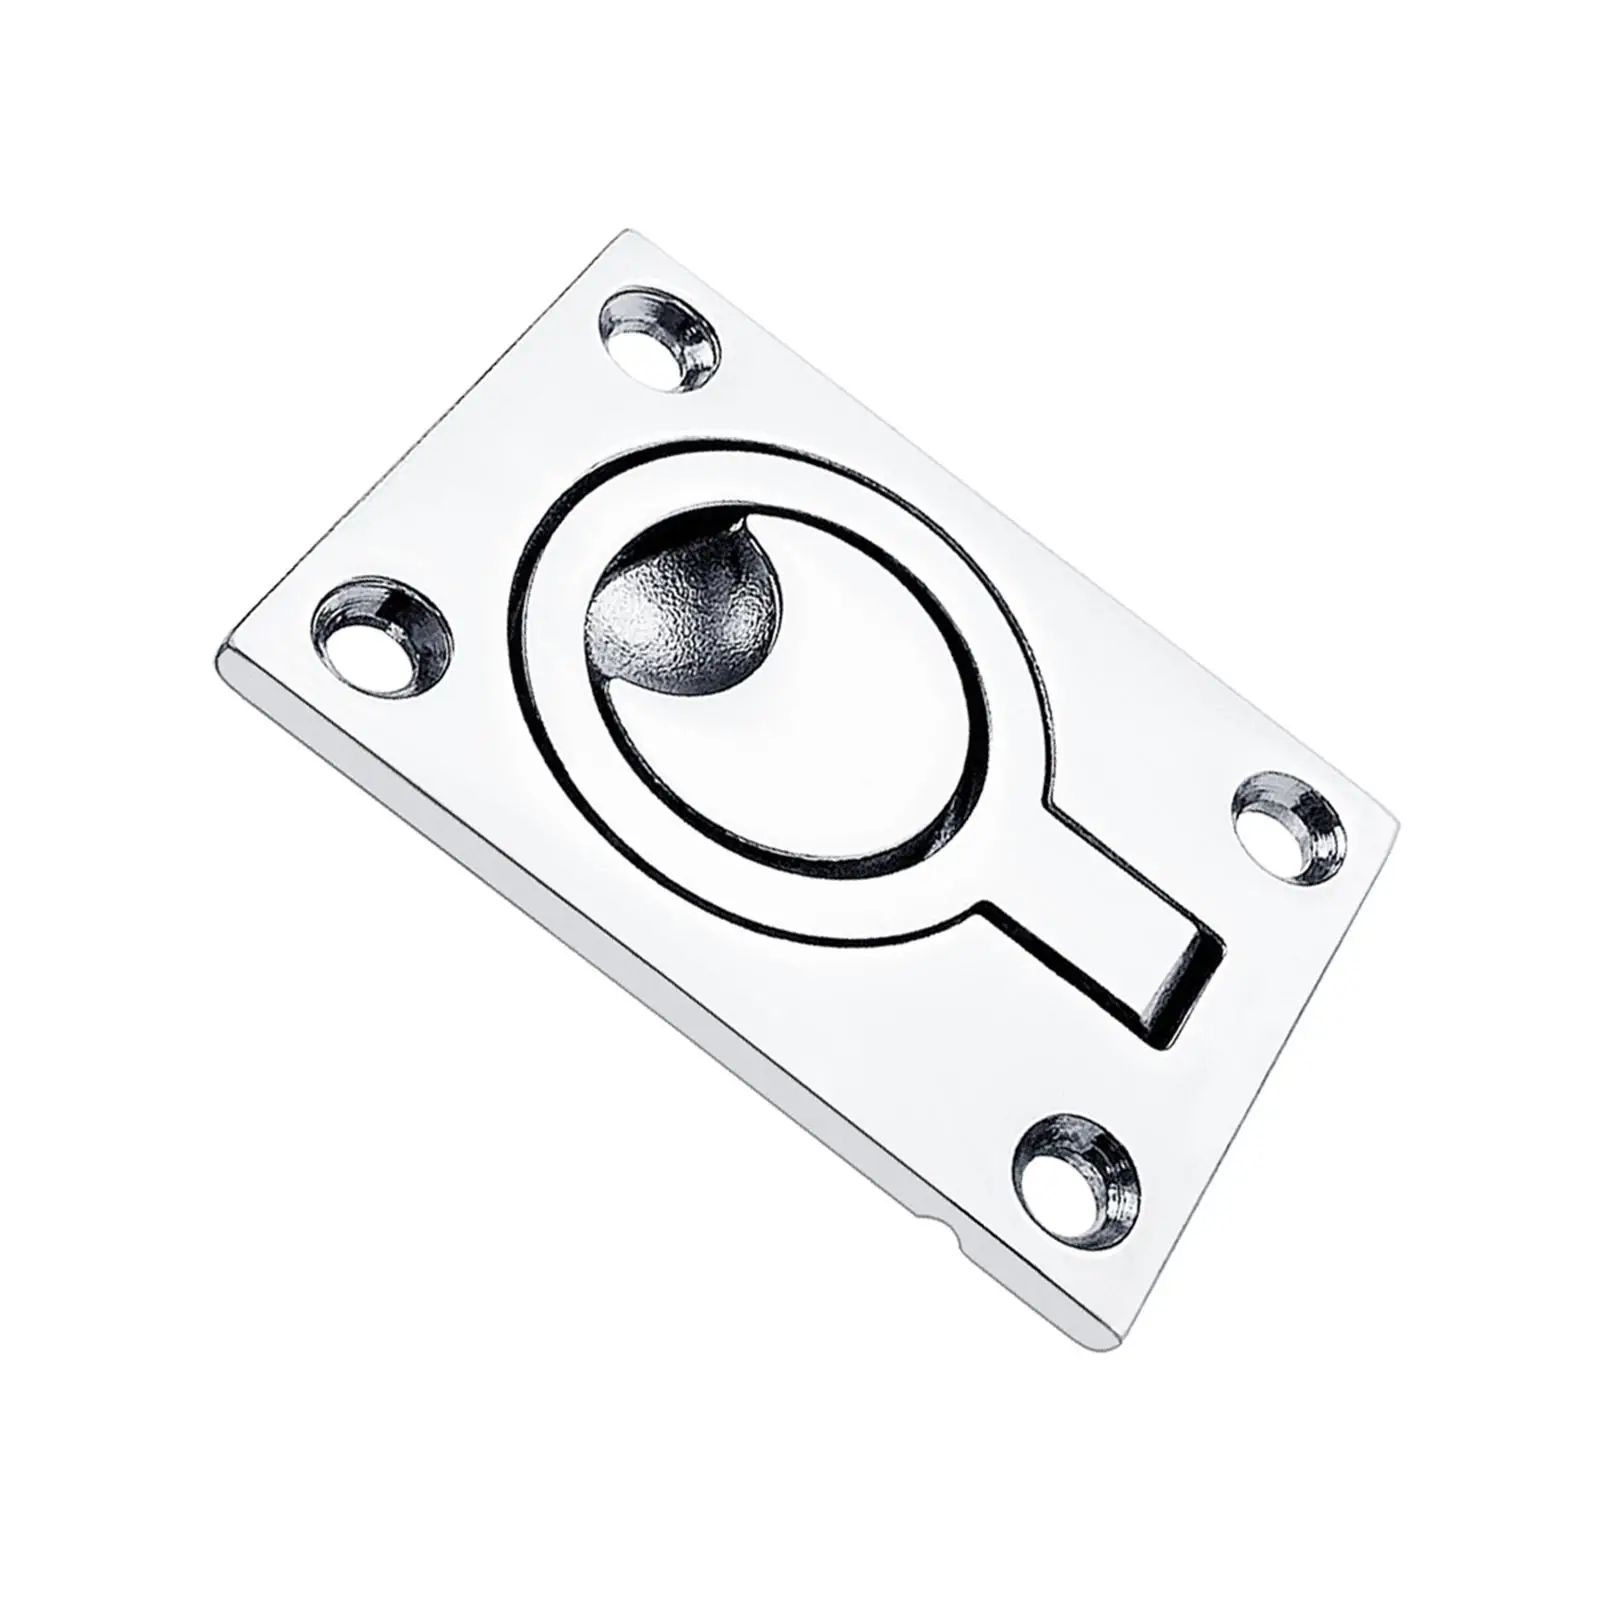 Flush Pull Ring Handles Stainless Steel Boat Pull Flush Lift Ring for Boat Deck Hatch Home Furniture Yacht Deck